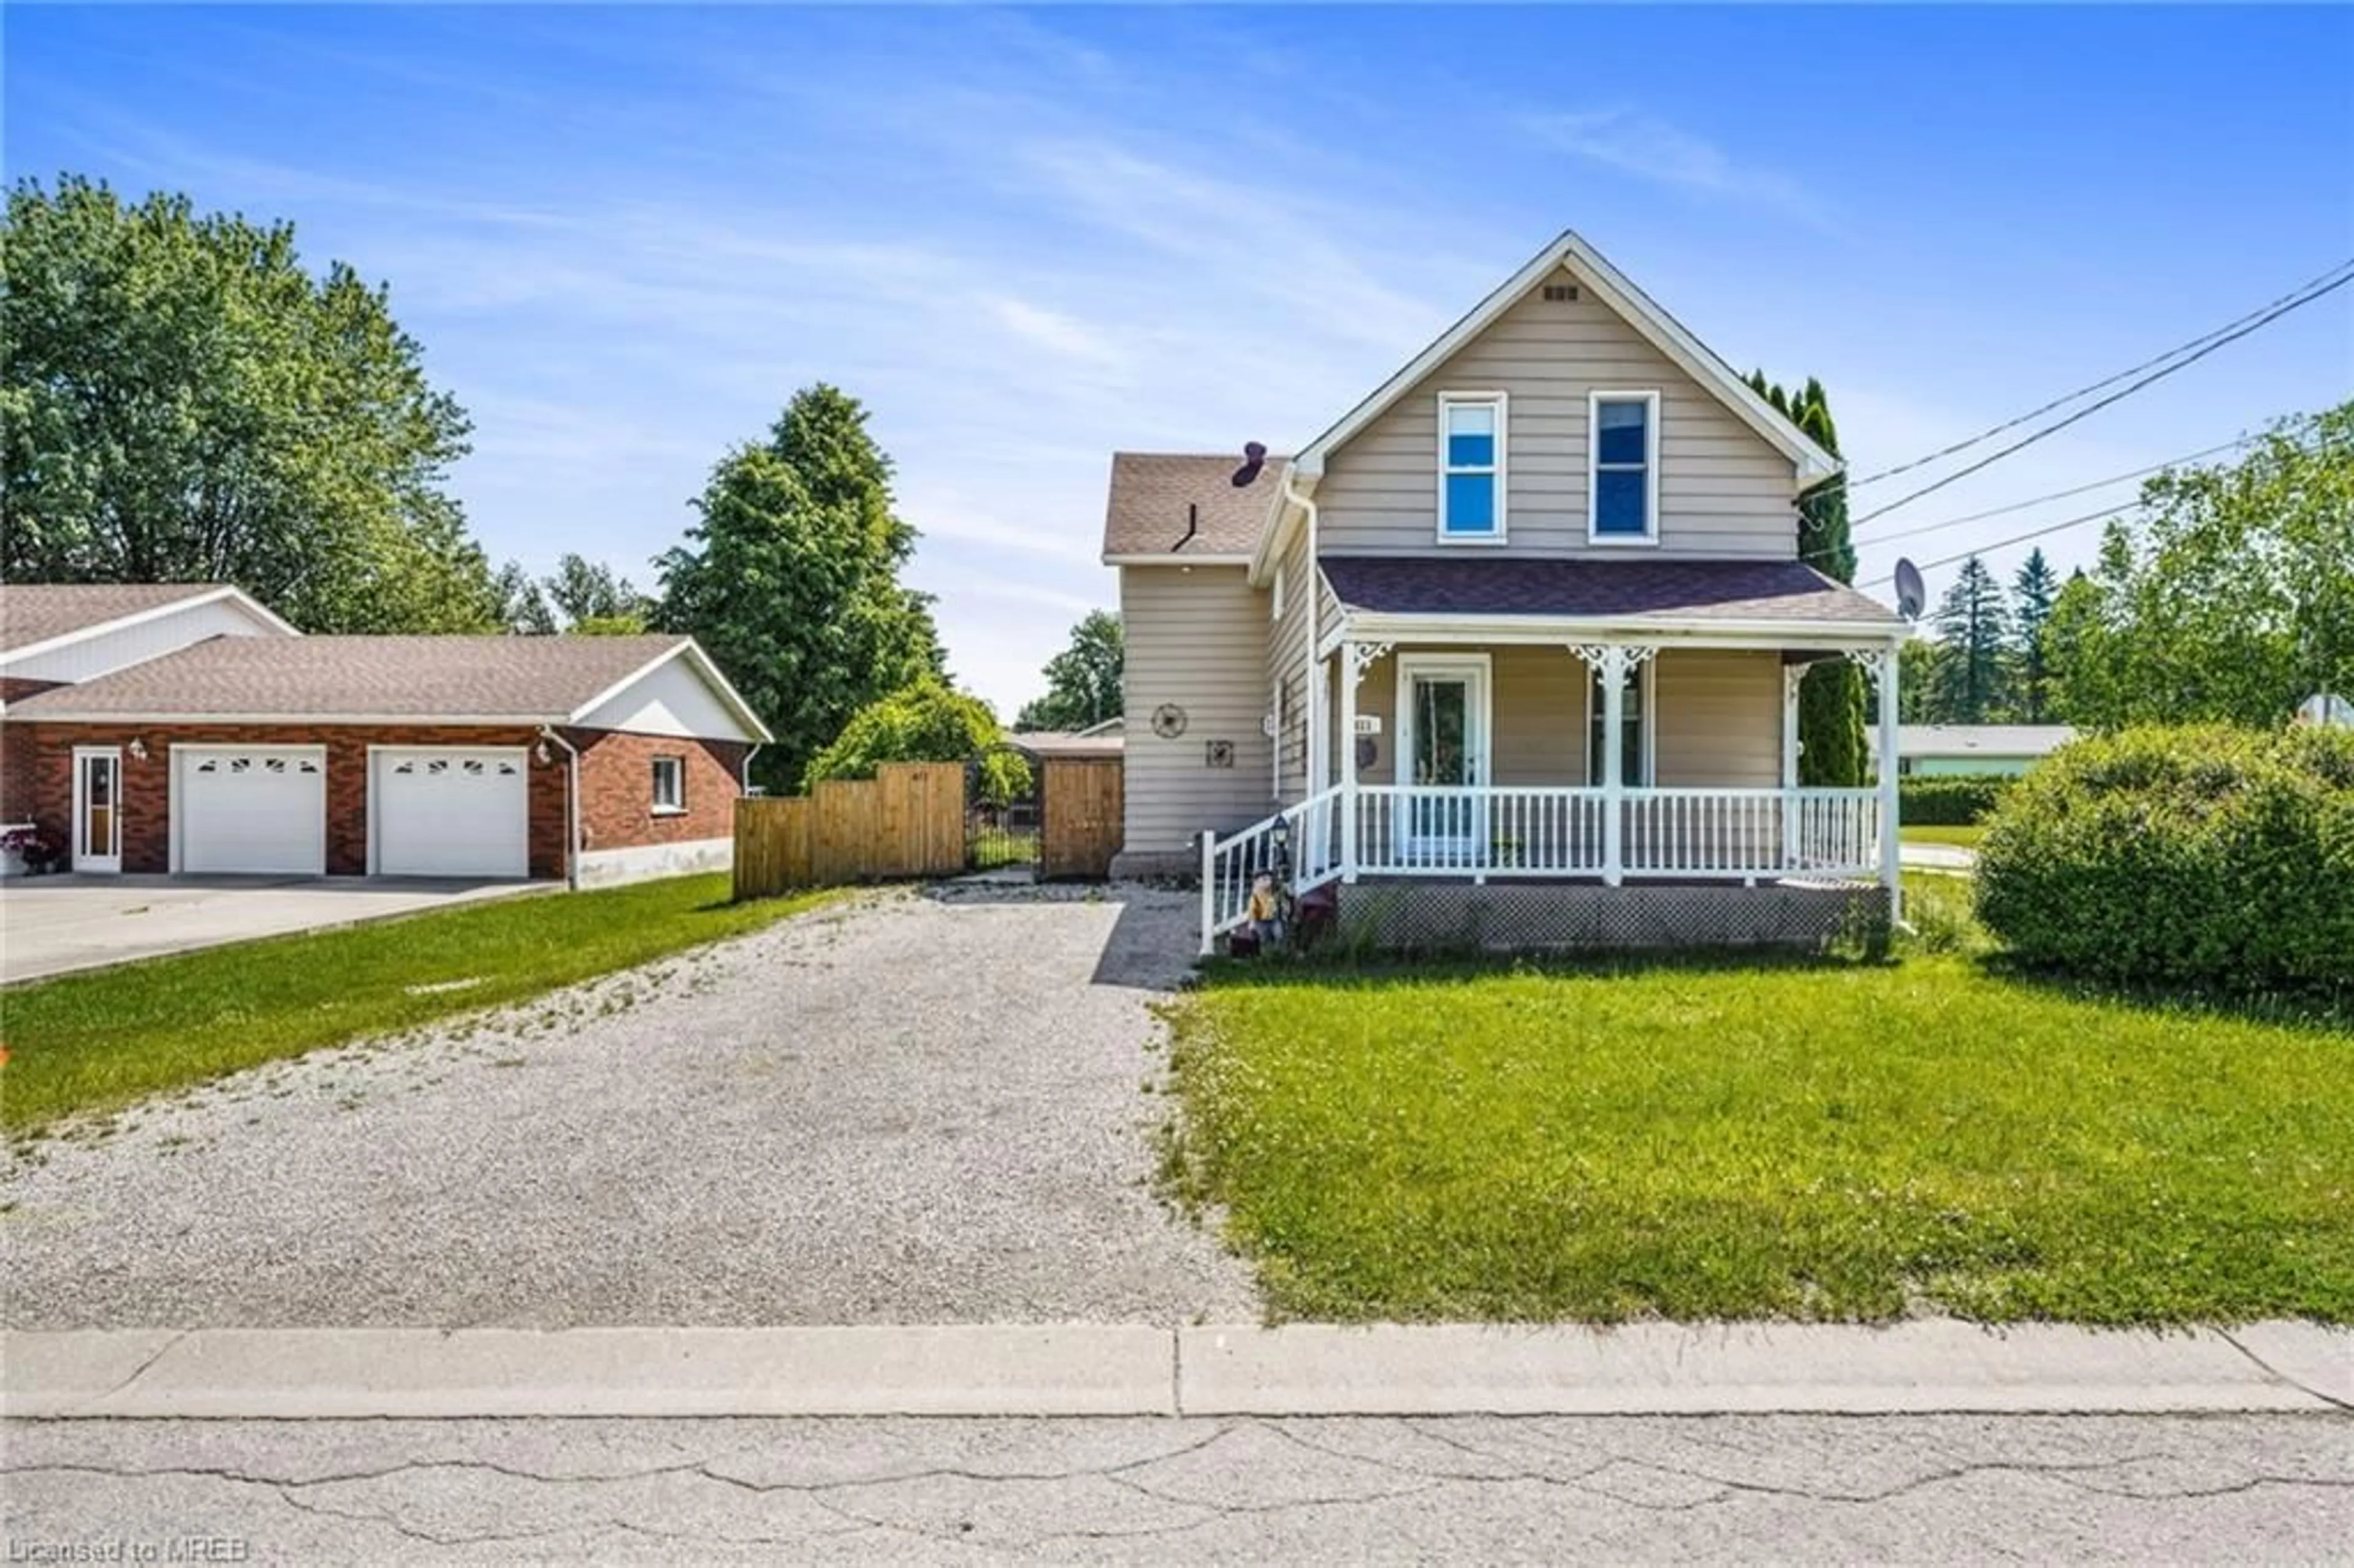 Frontside or backside of a home for 411 Taylor St, Wiarton Ontario N0H 2T0